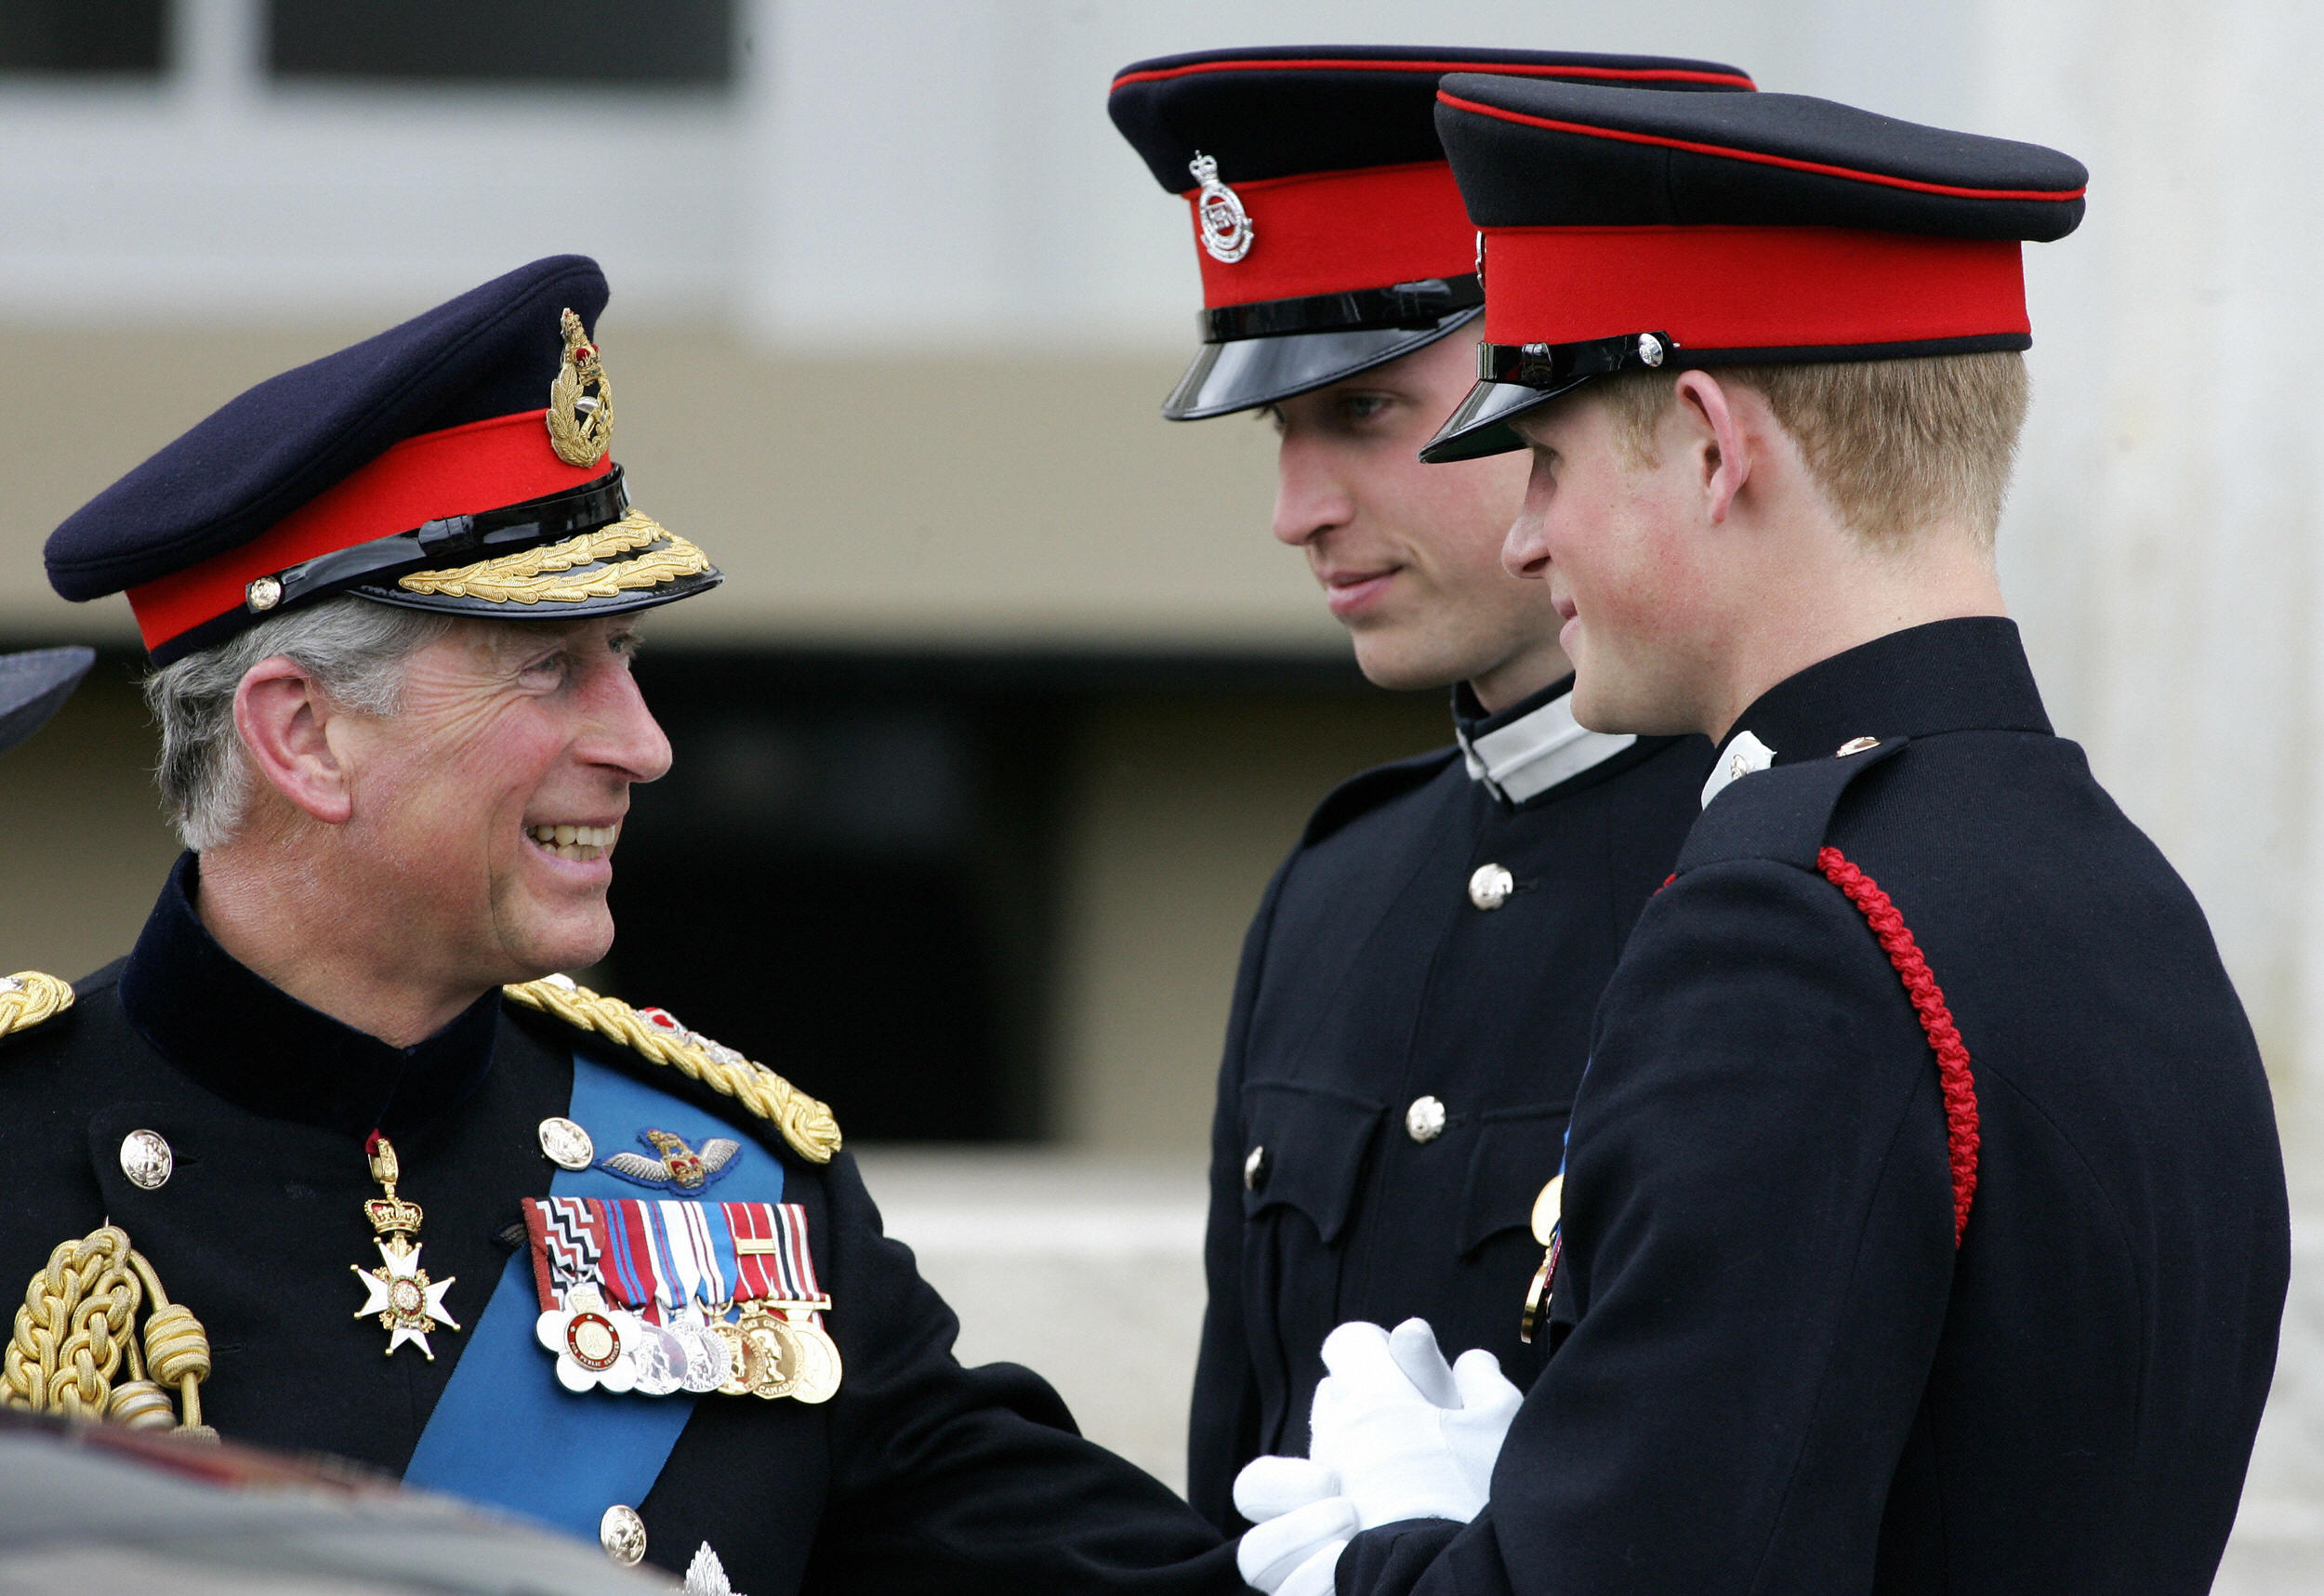 Britain's Prince Charles (L) speaks with his two sons Prince's William (C) and Harry (R) after attending the Sovereign's Parade at the Royal Military Academy in Sandhurst, southern England, April 12, 2006. | Source: Getty Images